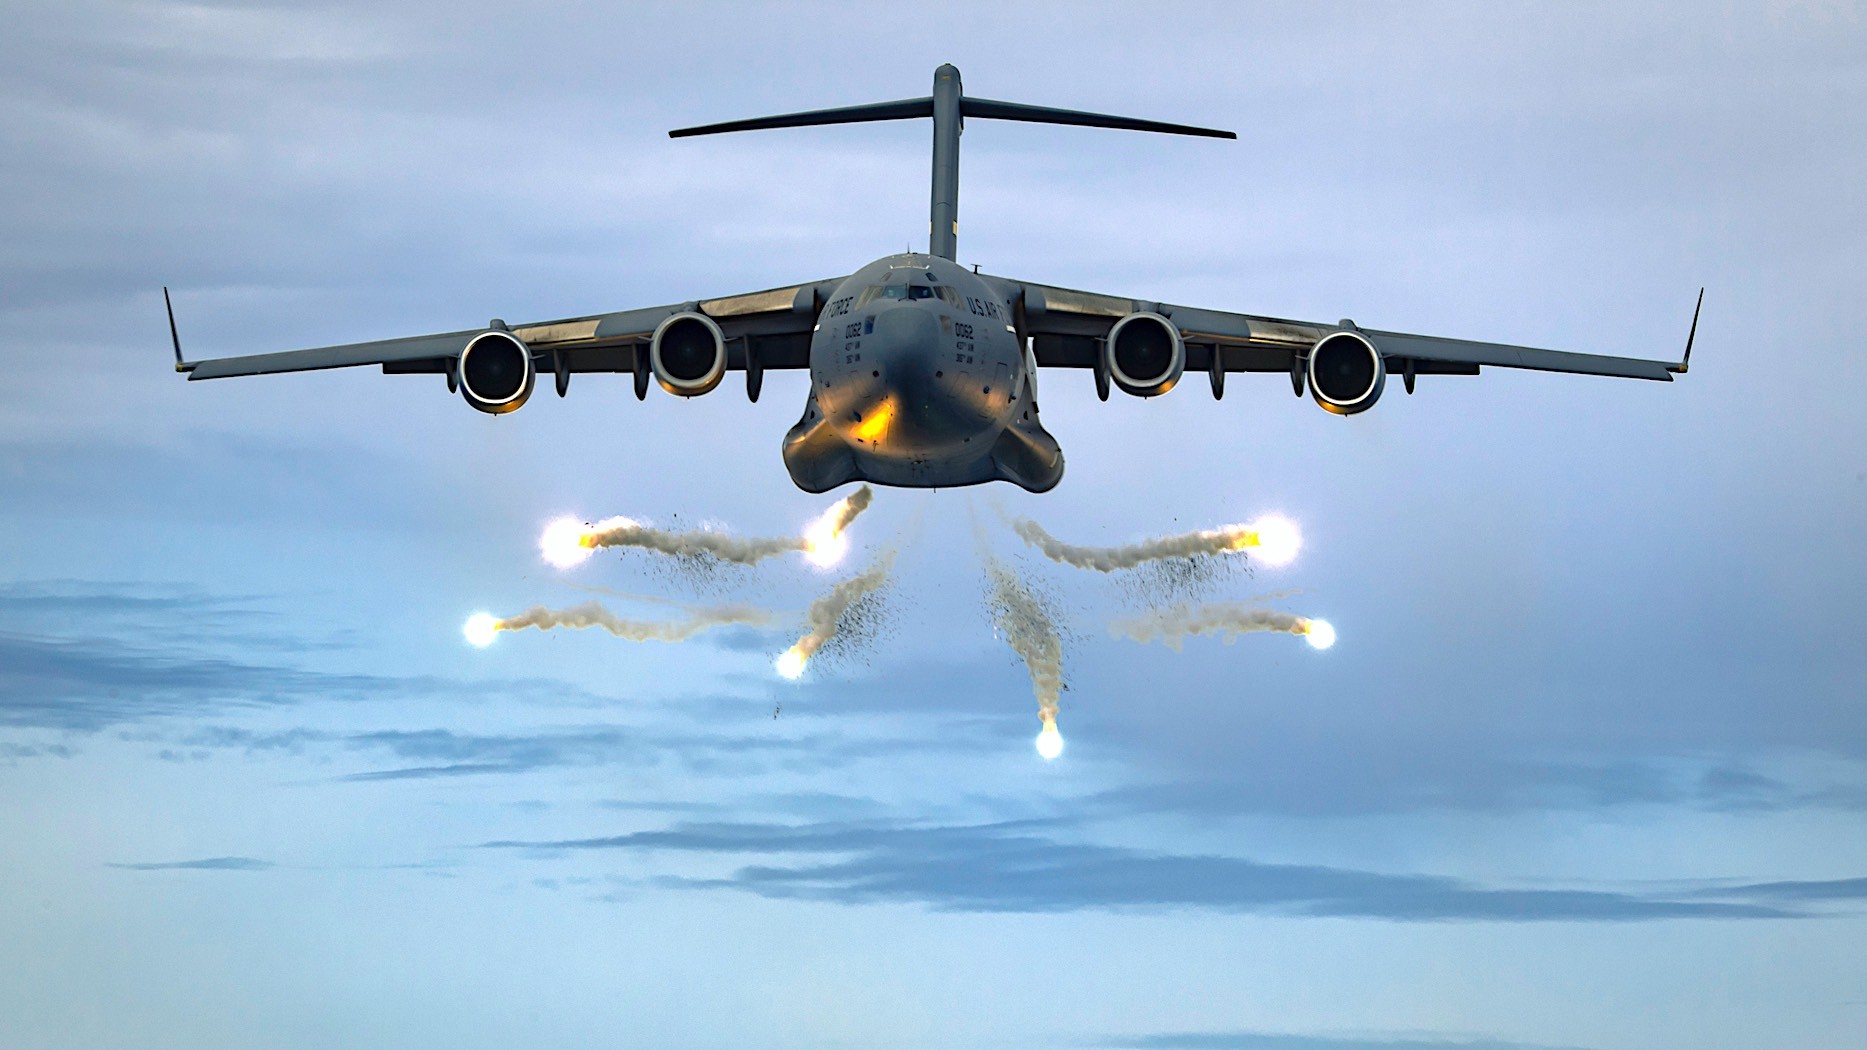 https://s1.cdn.autoevolution.com/images/news/gallery/c-17-globemaster-can-drop-cargo-and-tanks-looks-its-best-when-firing-flares_1.jpg